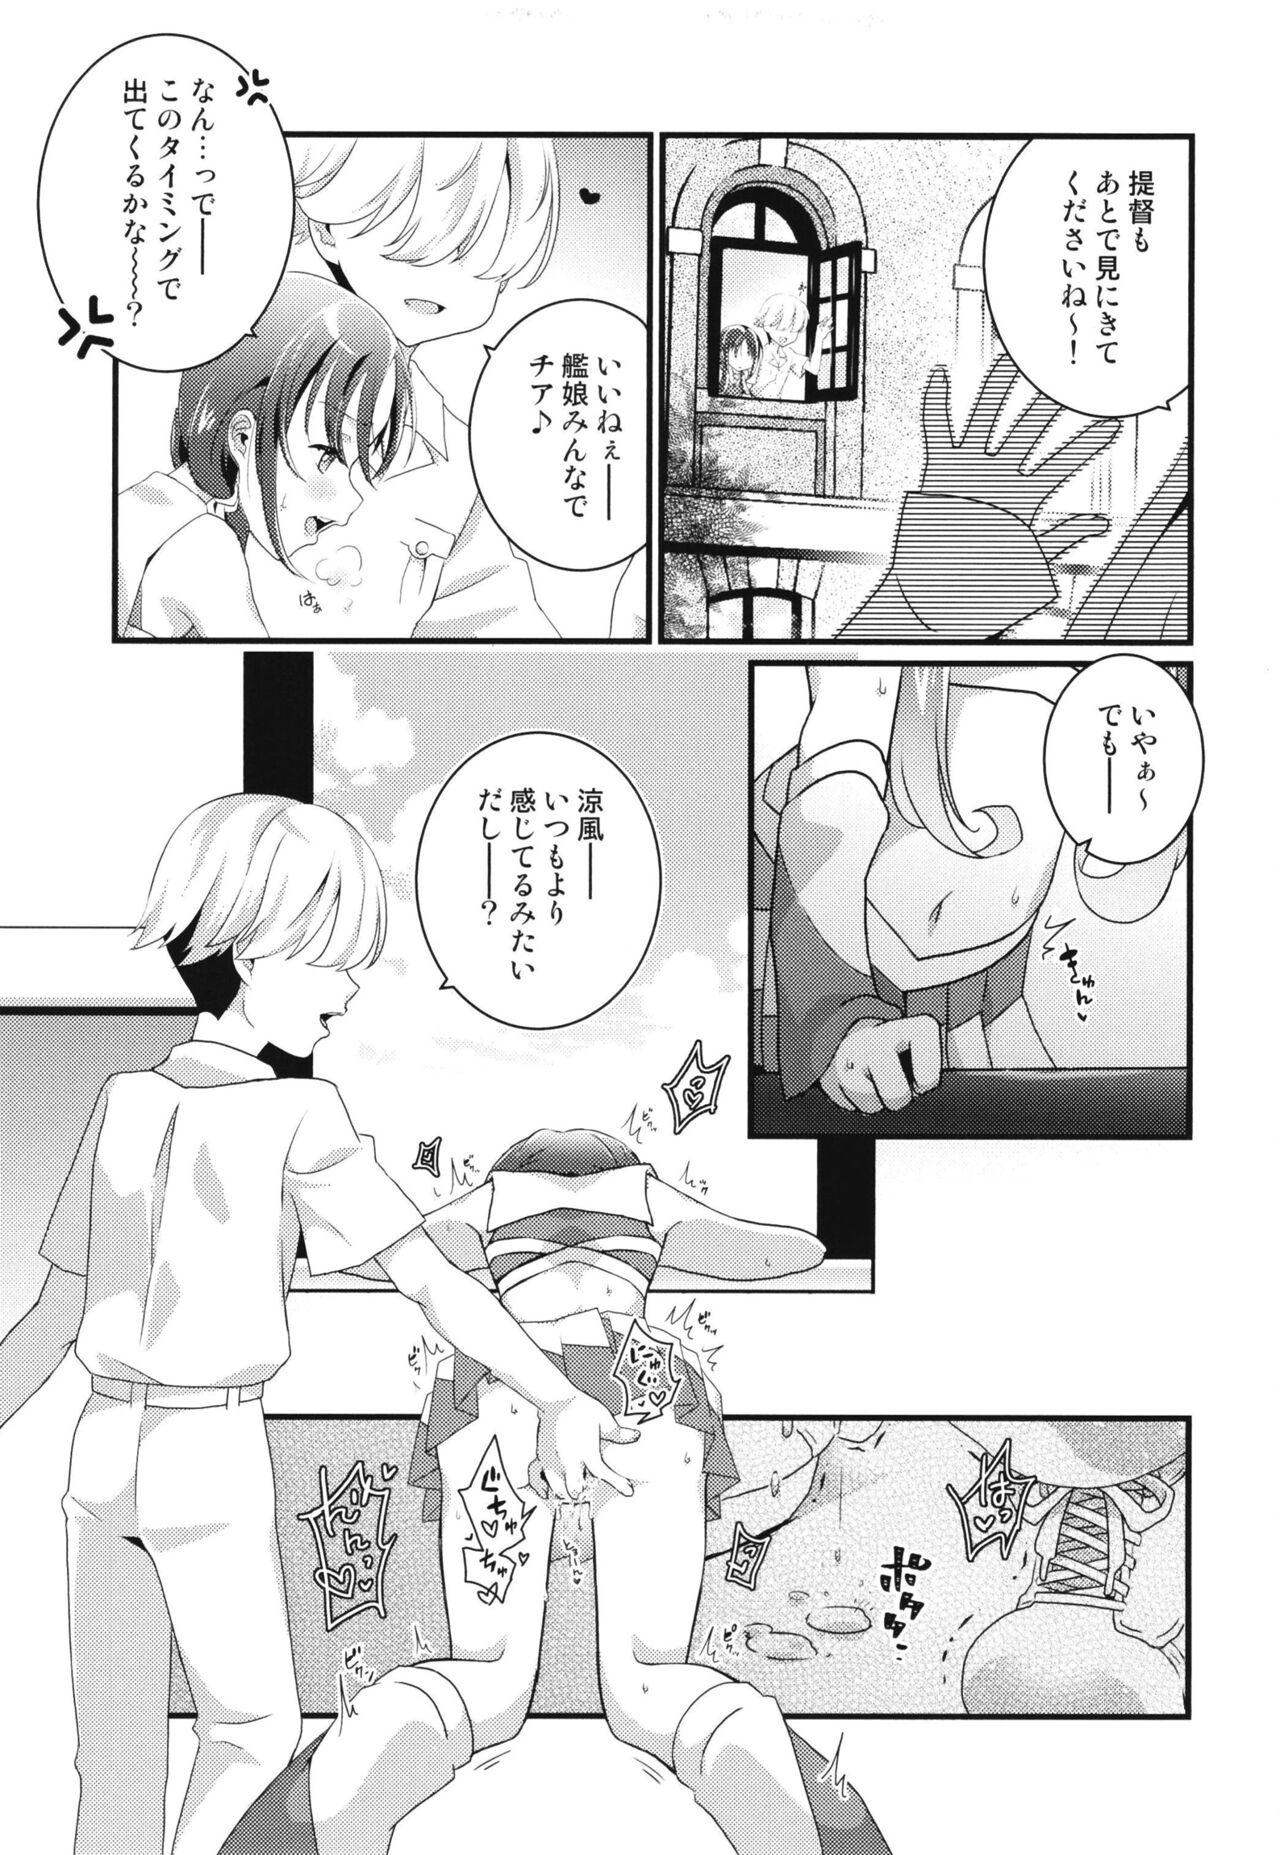 Action Yah! Cheer! yeah! - Kantai collection Amateurs Gone Wild - Page 5